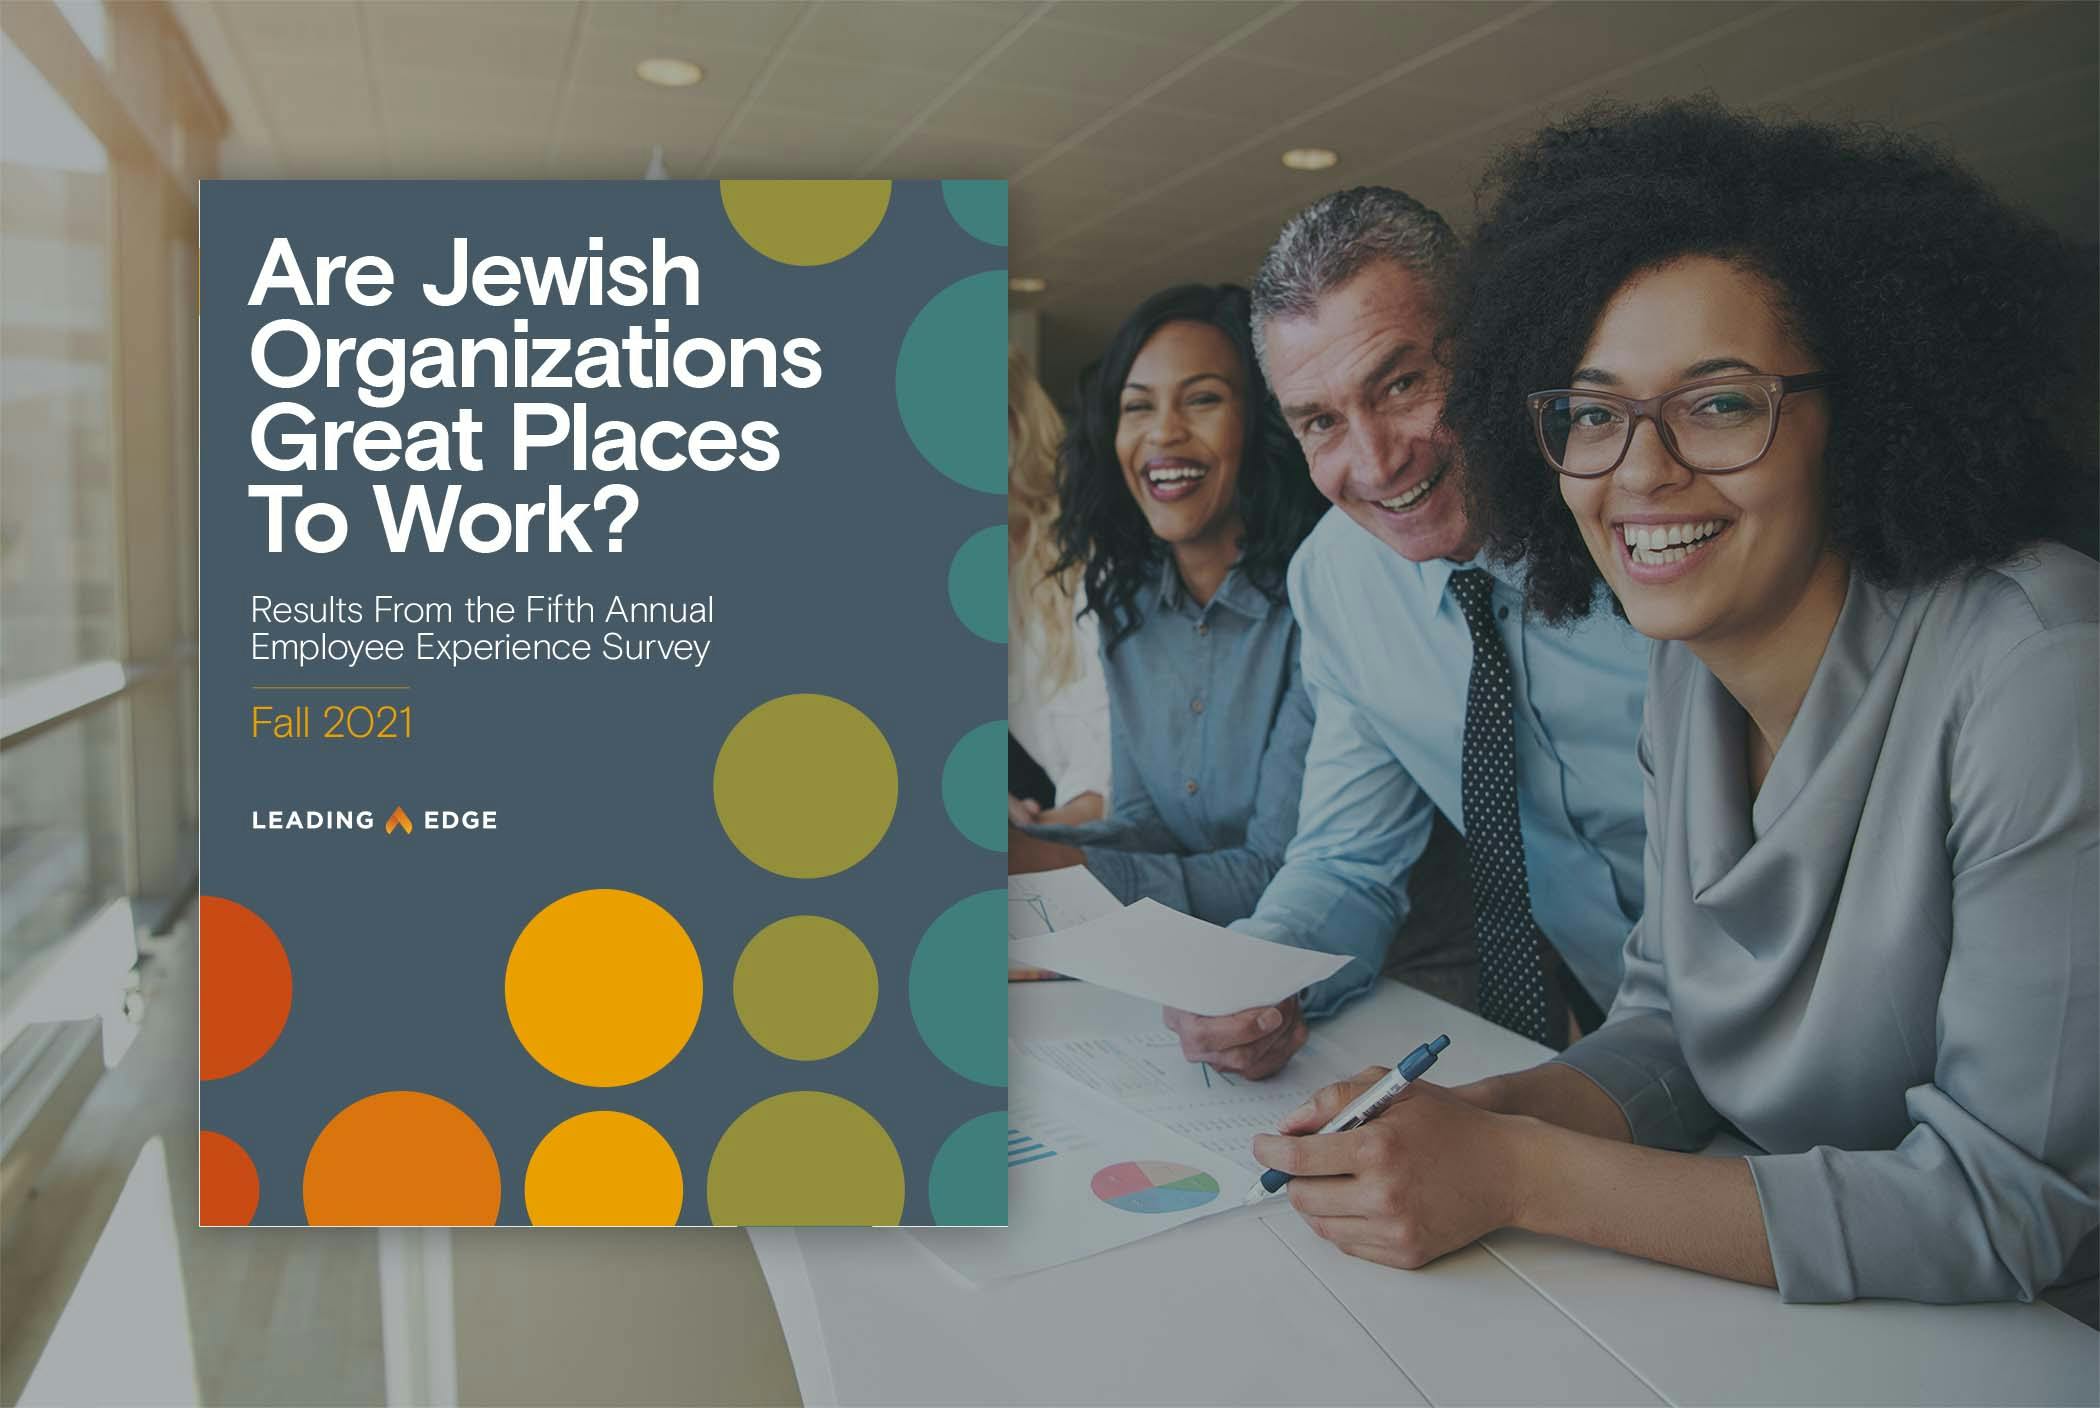 Are Jewish Organizations Great Places to Work? Results from the Fifth Annual Employee Experience Survey